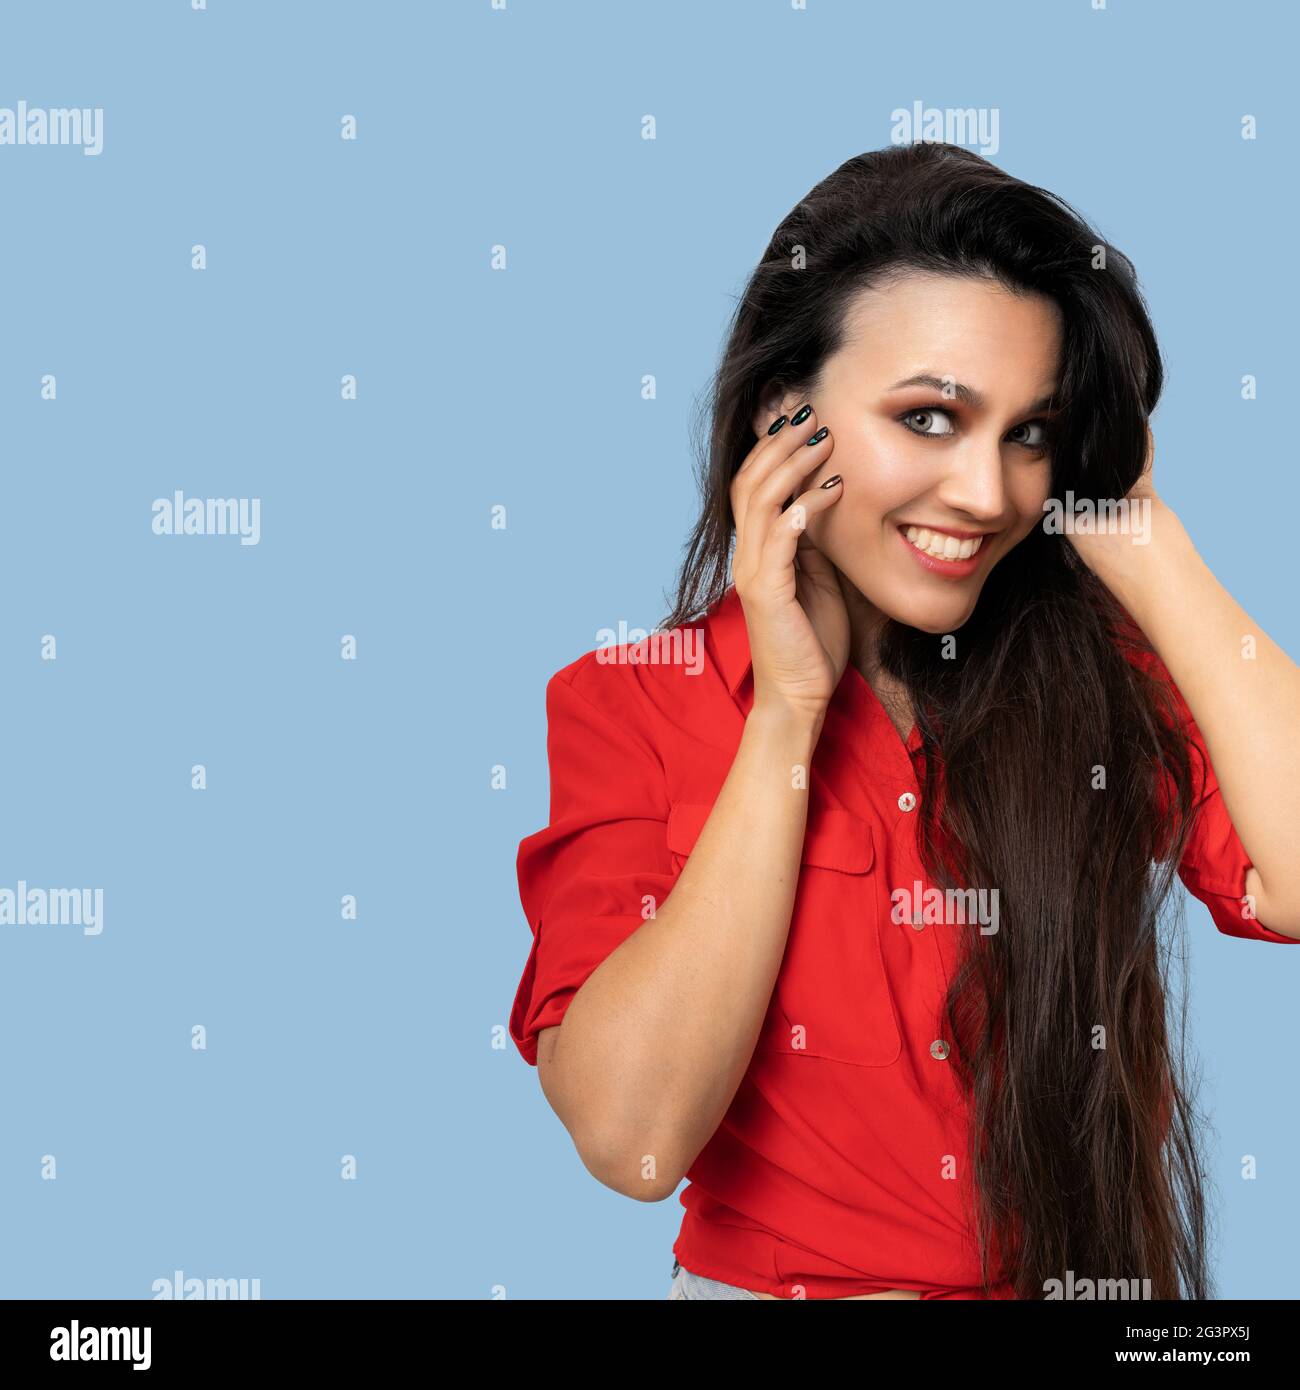 Toothy smiling woman touching face with hands while looking at camera. Side view of pretty young brunette in a red blouse posing Stock Photo